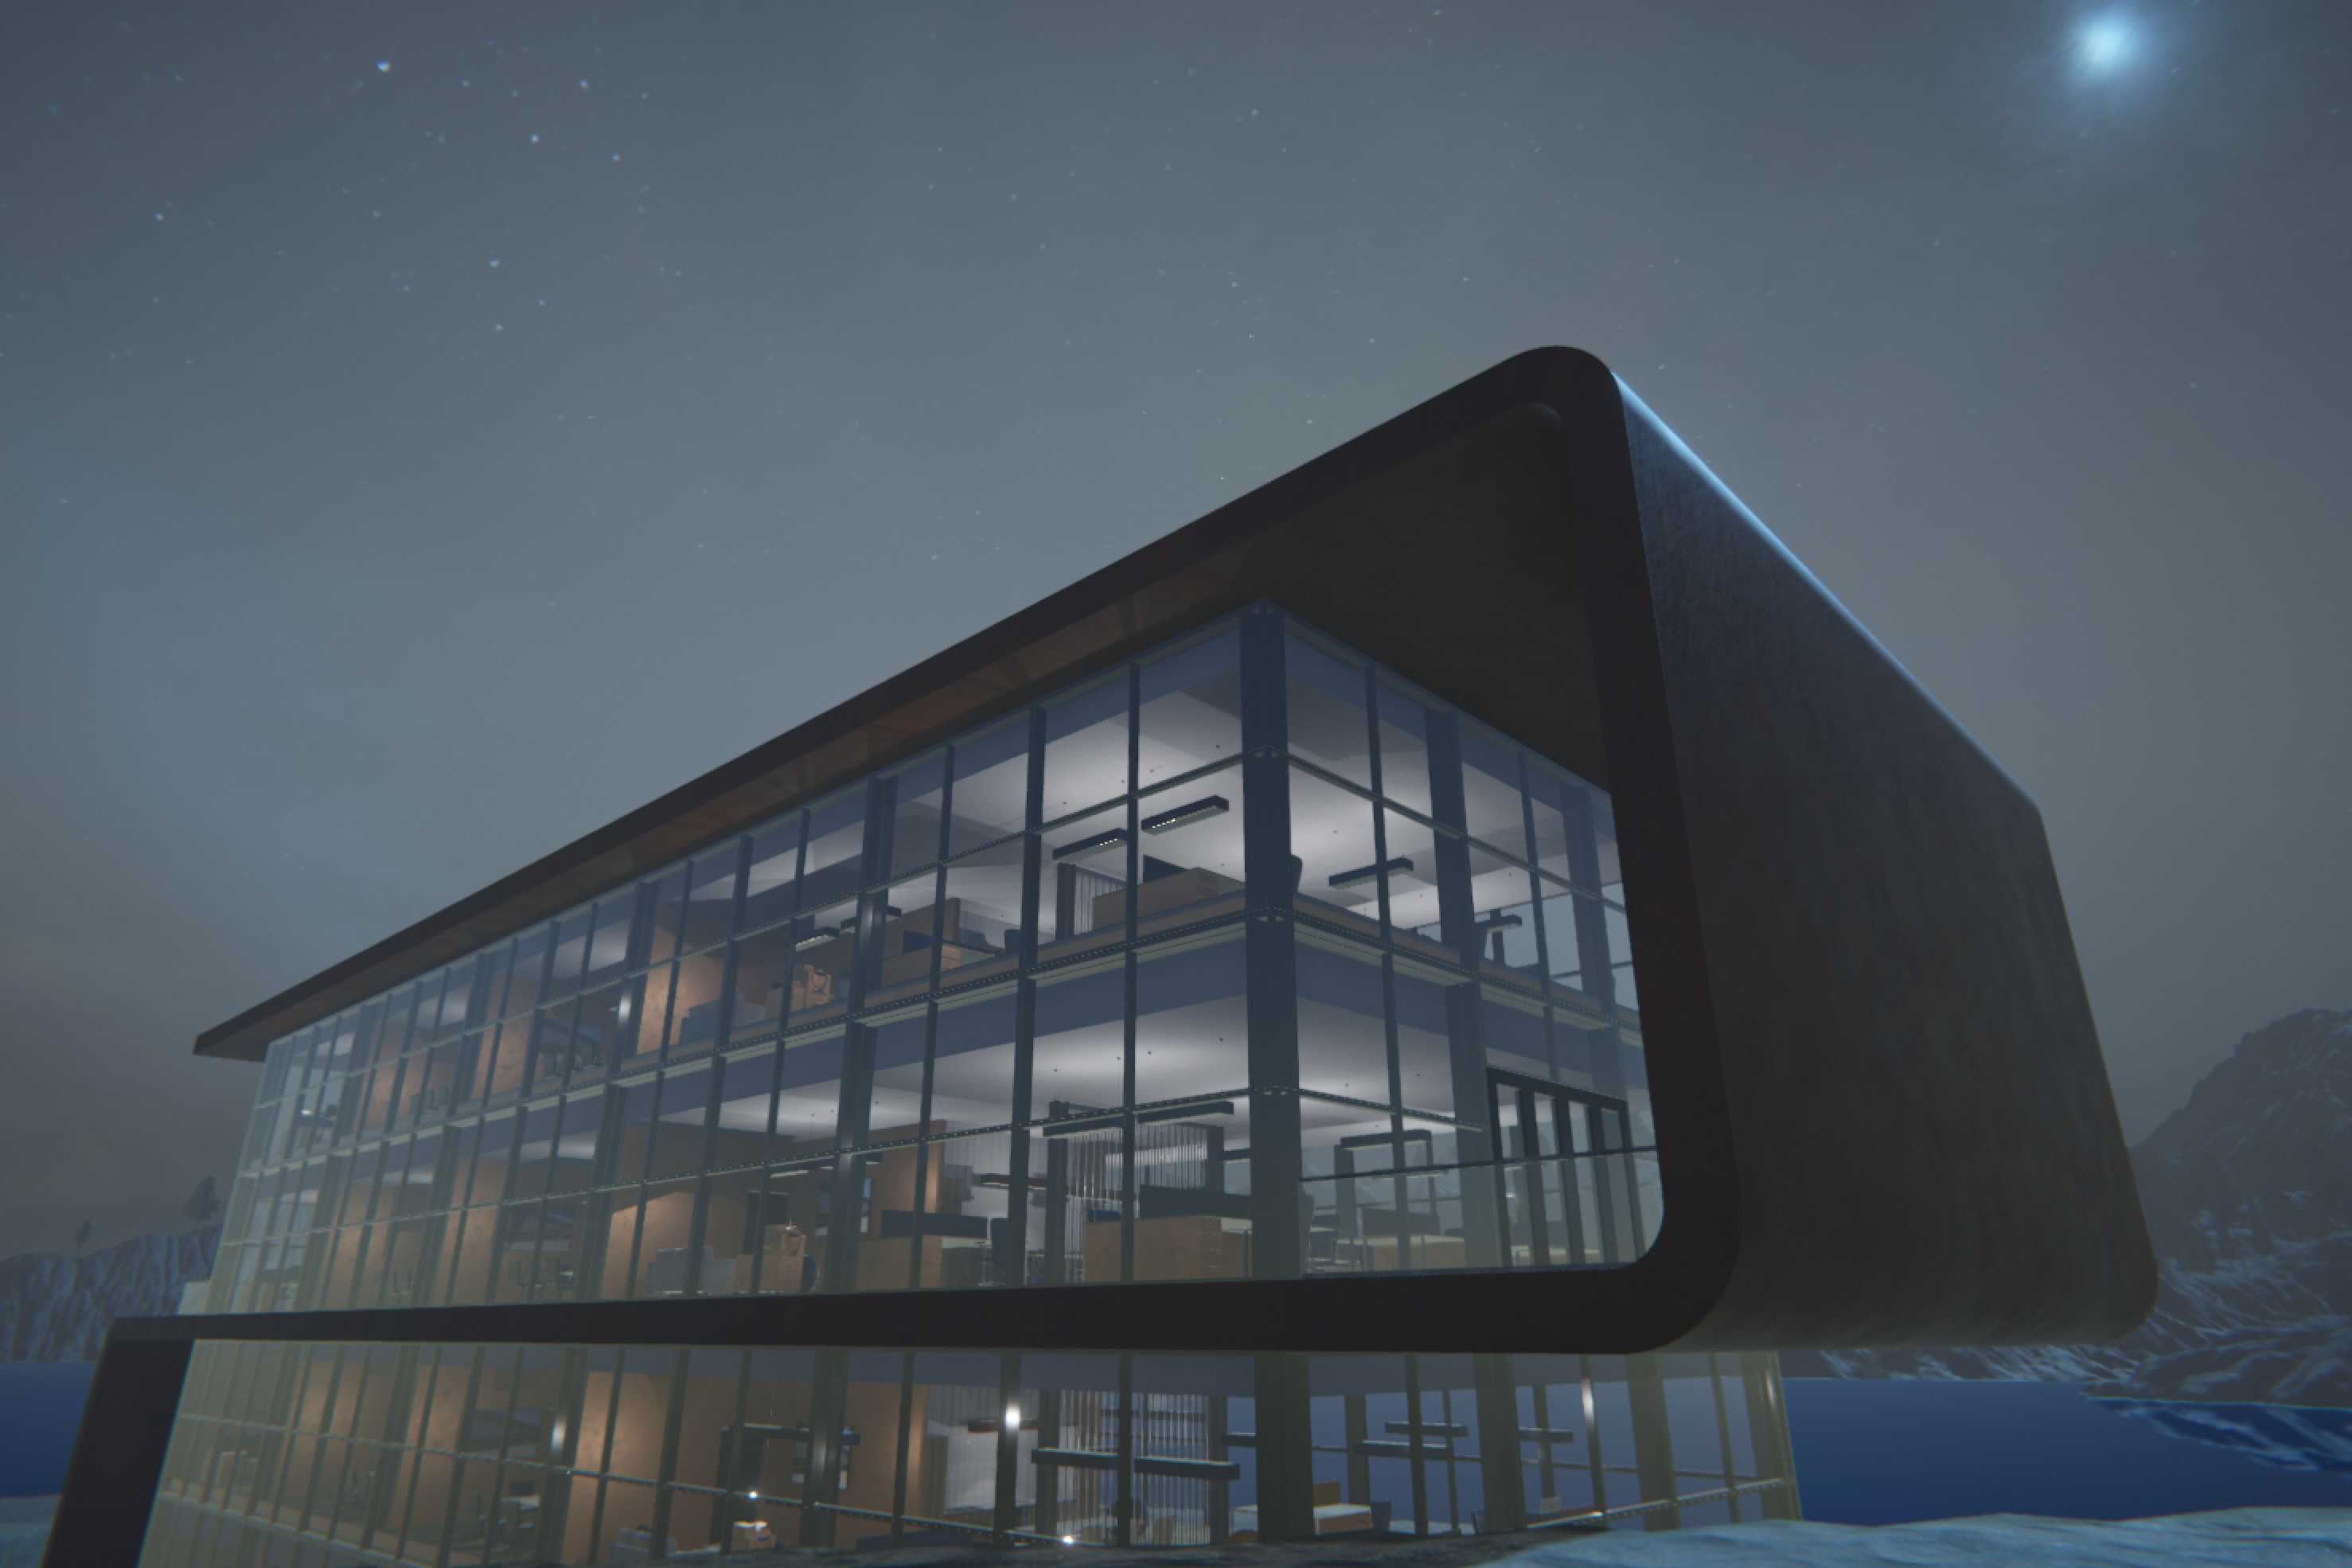 This is a Graphisoft example European office building, pulled into Unity from ArchiCAD via Modo - a test for dealing with large numbers of entities - furnishings, doors, partitions etc. Looks *great* clad in Corten steel - thanks to Substance in Unity!